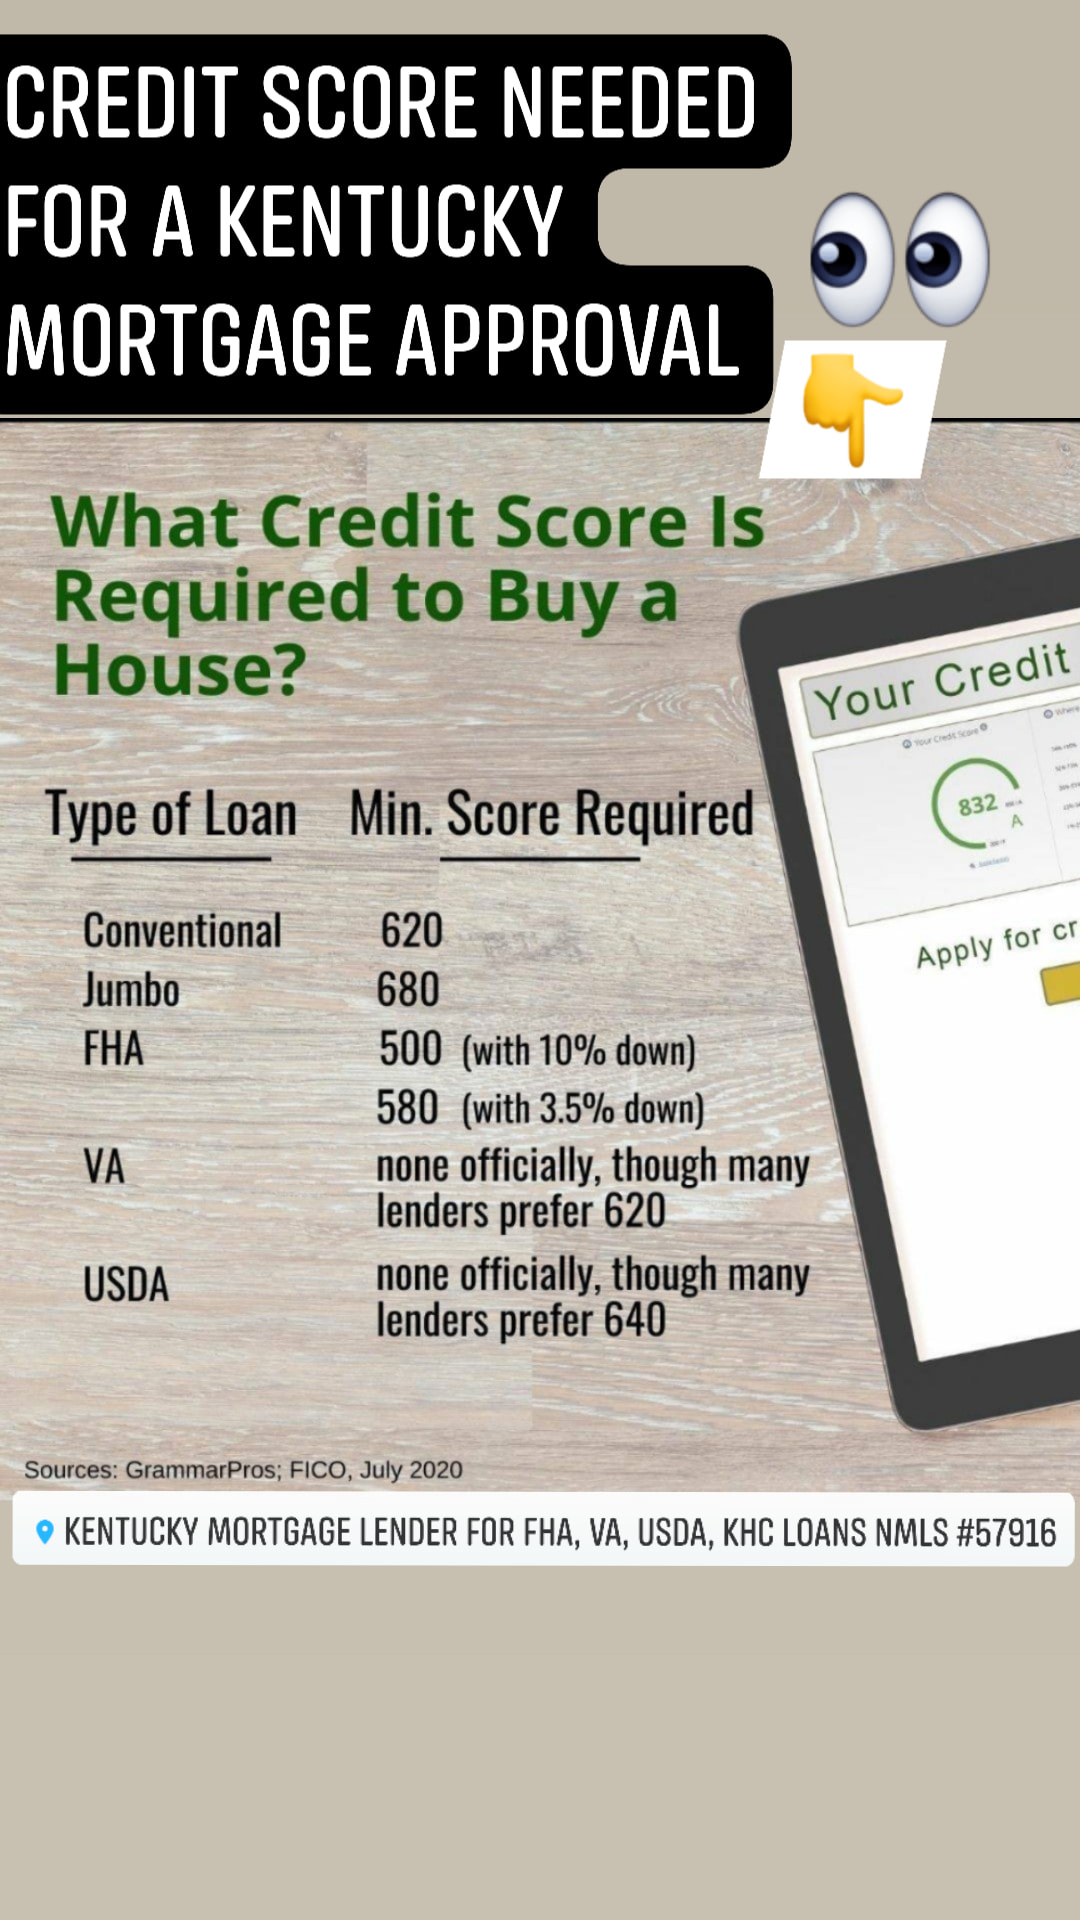 Credit Scores Required For A Kentucky Mortgage Loan Approval in 2021   What kind of credit score do I need to qualify for different first time home buyer loans in Kentucky?